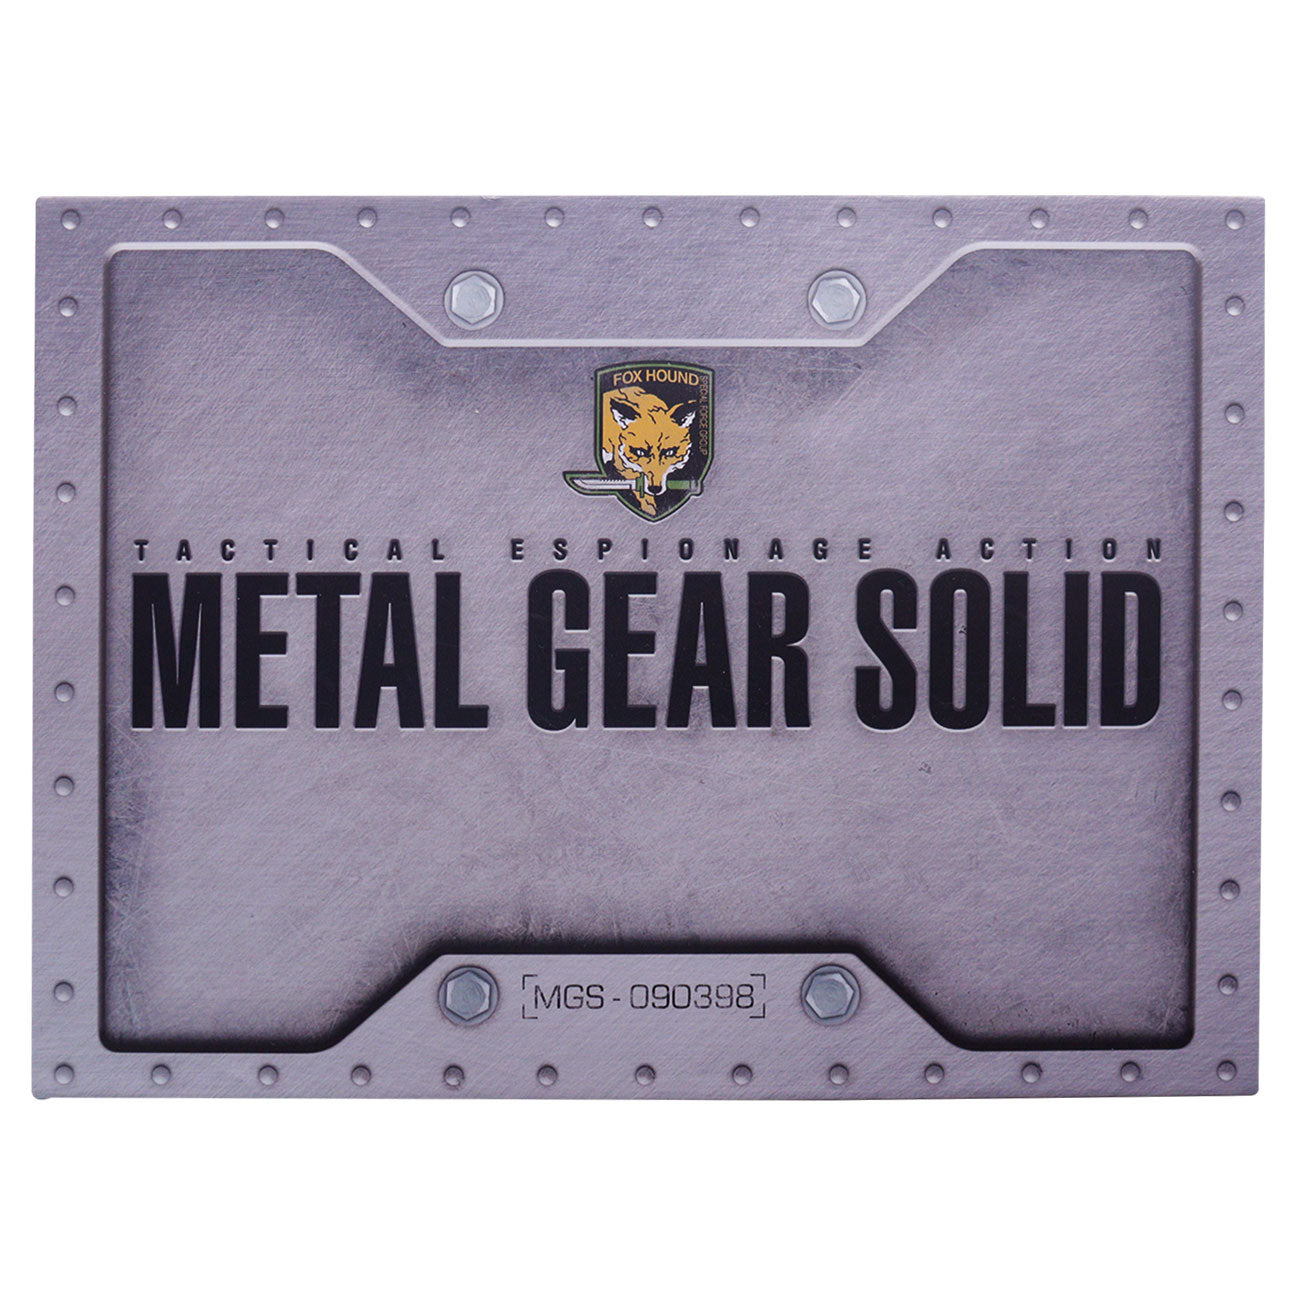 Metal Gear Solid Limited Edition Set of 3 key cards